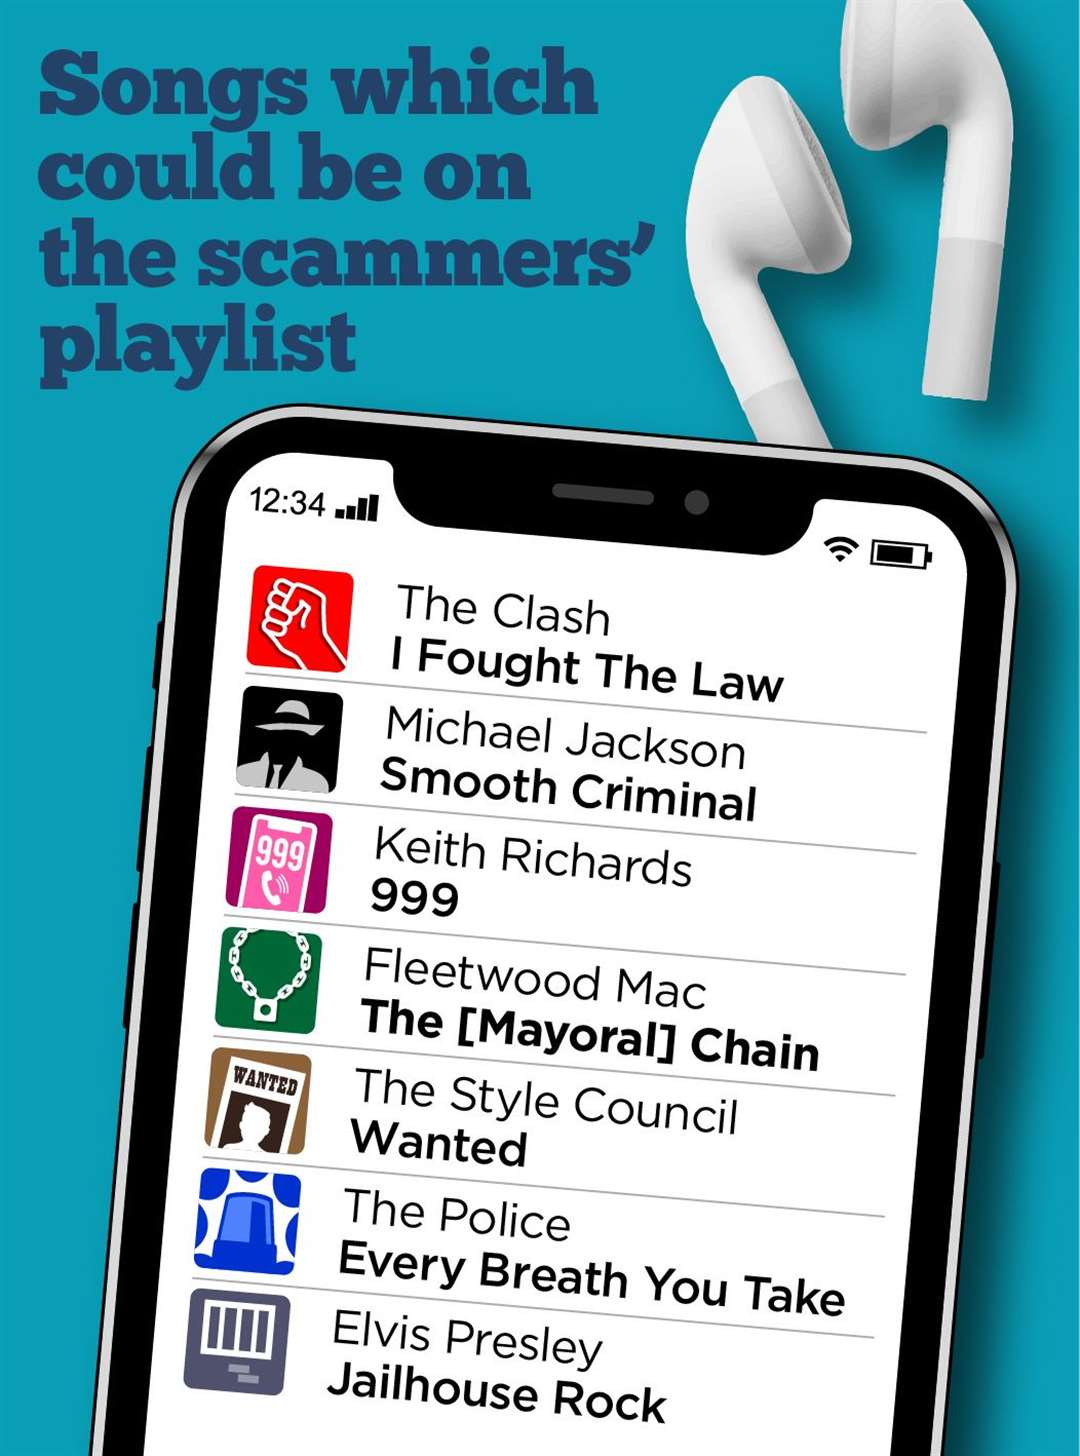 What the scammers might be listening to